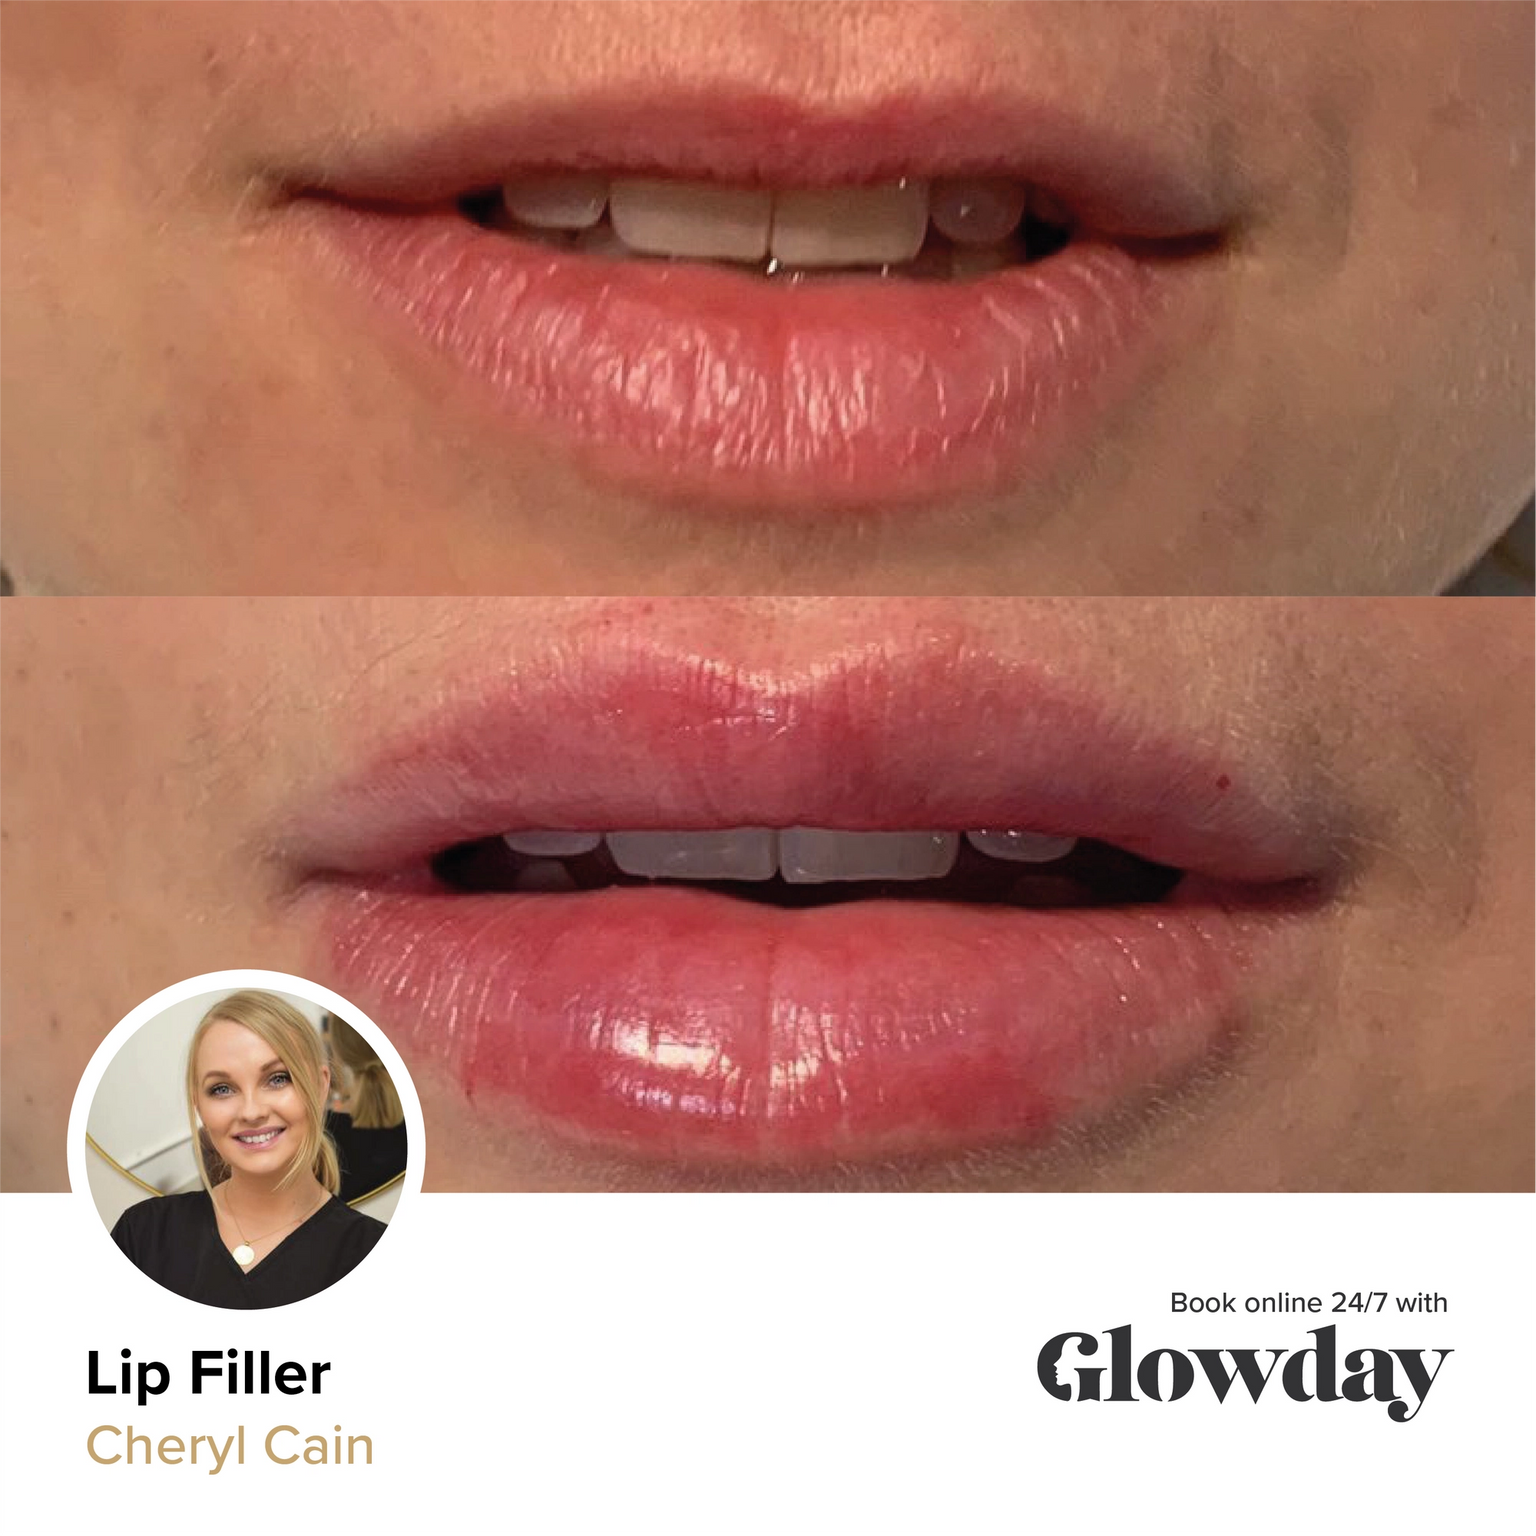 Juicy lip filler results - by Chery Cain